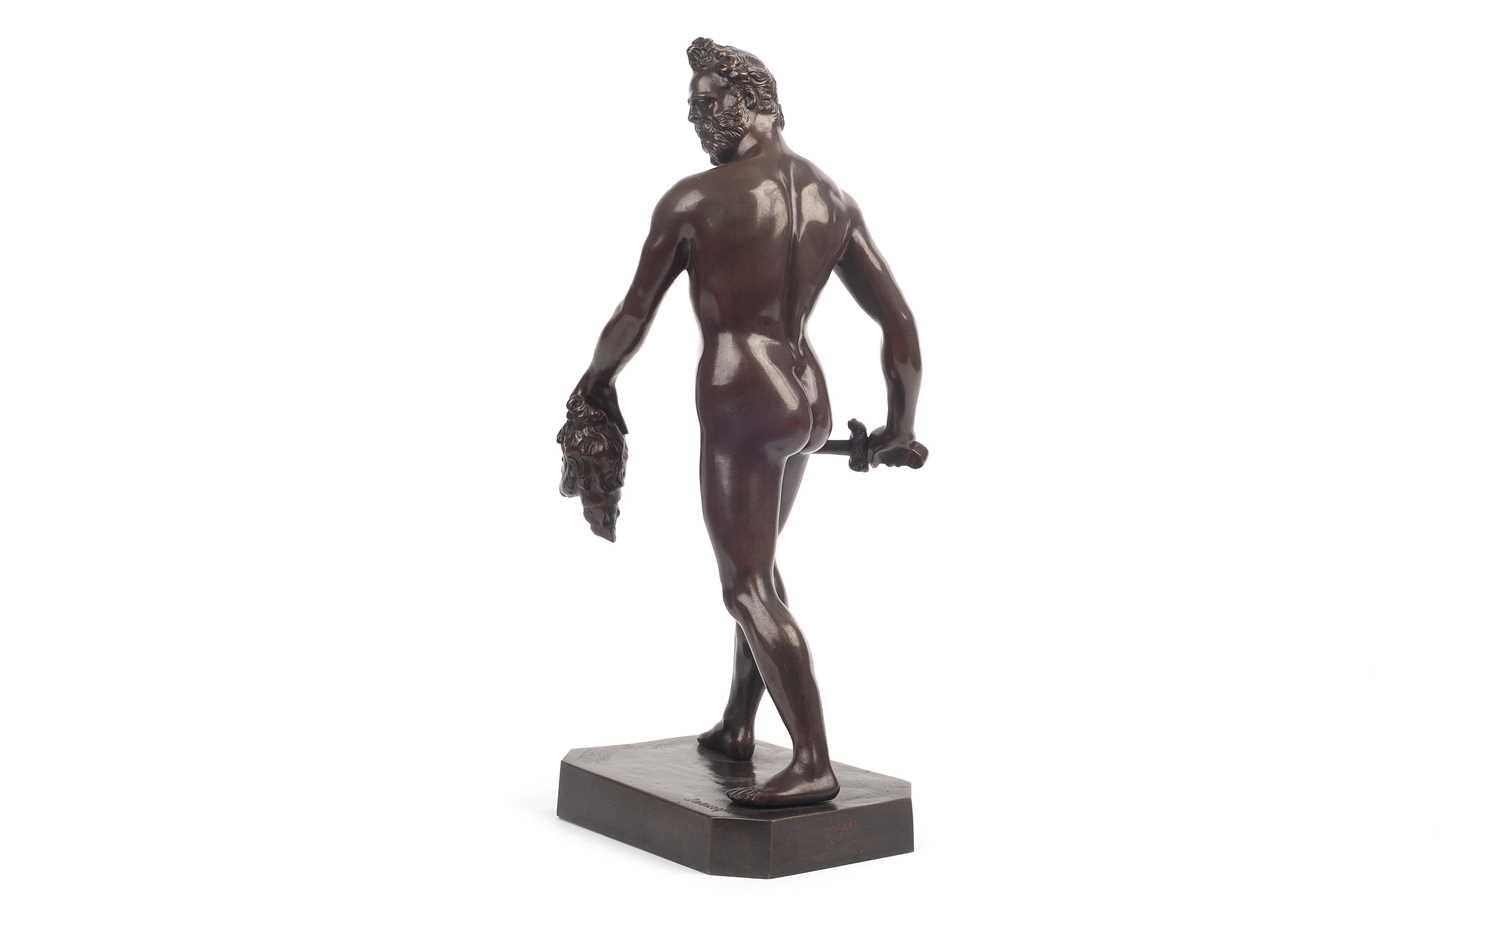 AFTER GIAMBOLOGNA (ITALIAN, 1529-1608): A 19TH CENTURY BRONZE FIGURE OF MARS - Image 4 of 6